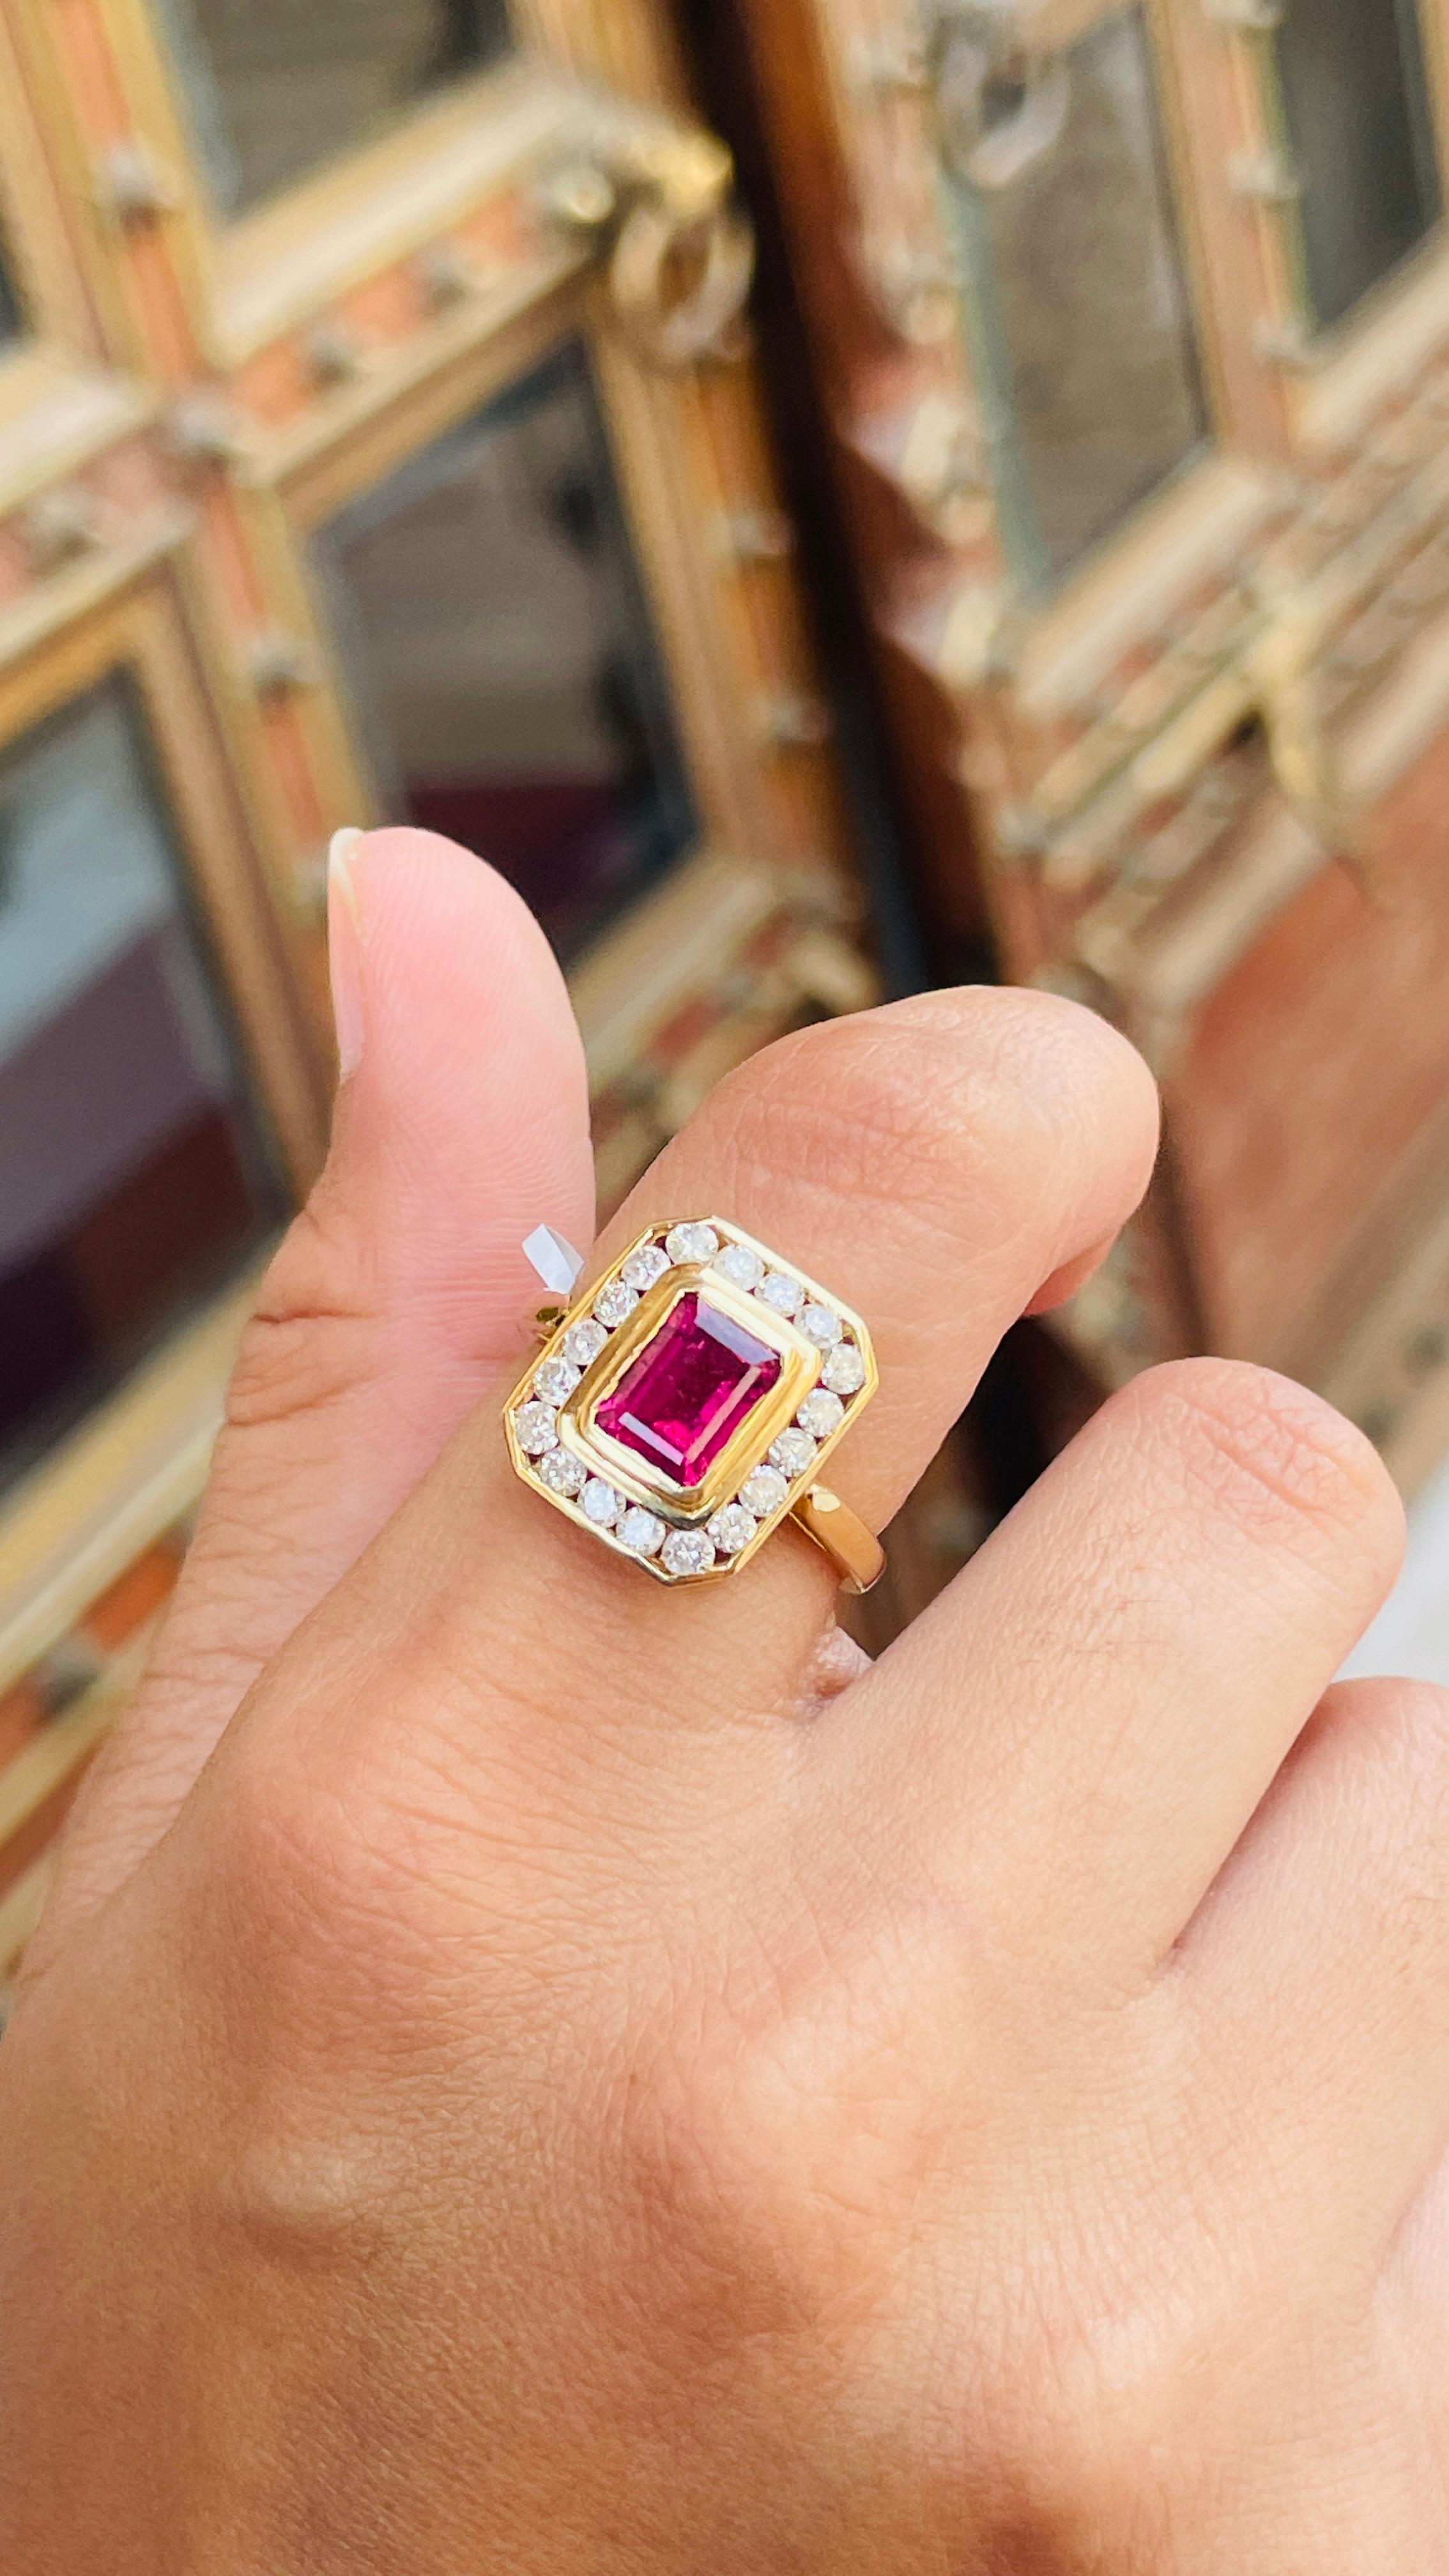 For Sale:  18K Yellow Gold Octagon Cut Ruby Diamond Engagement Ring 7